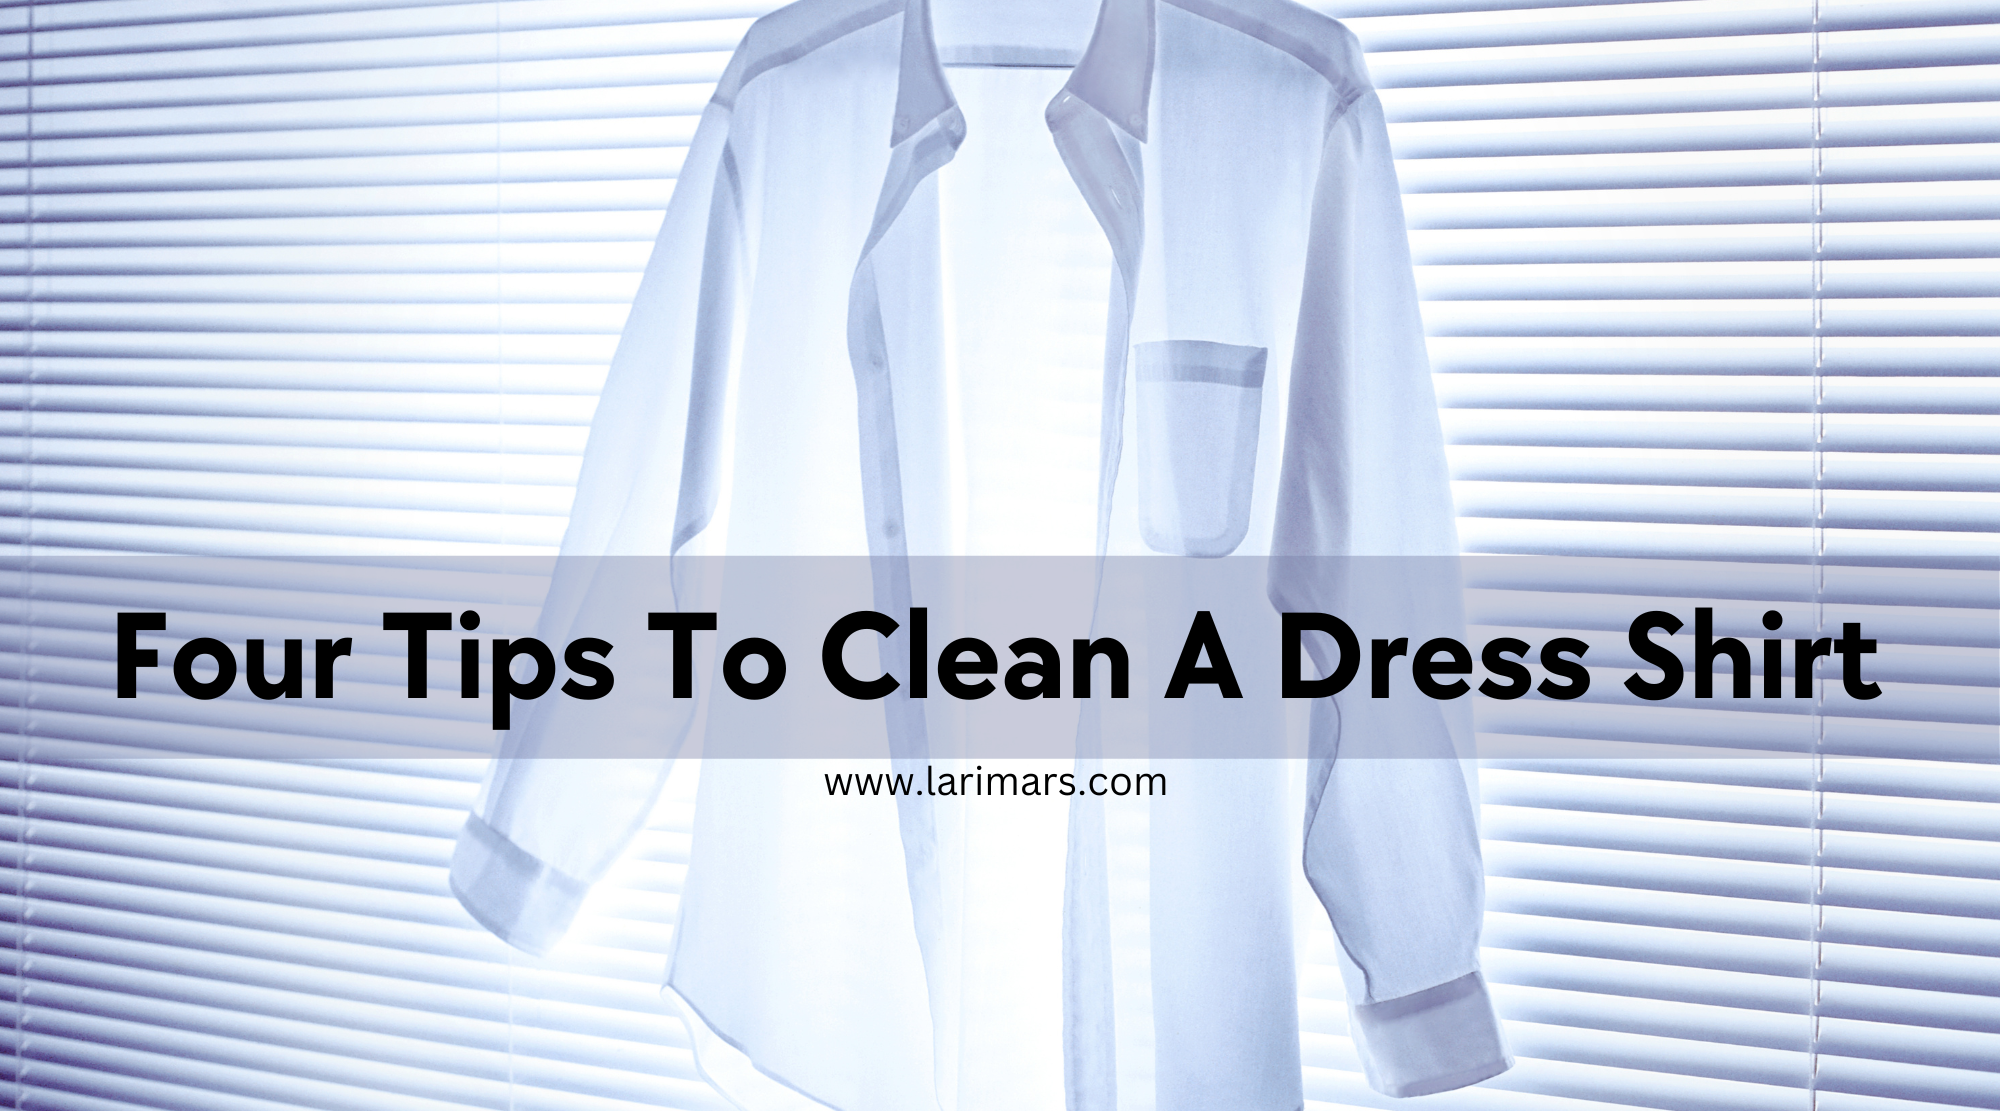 Tips to clean a dress shirt